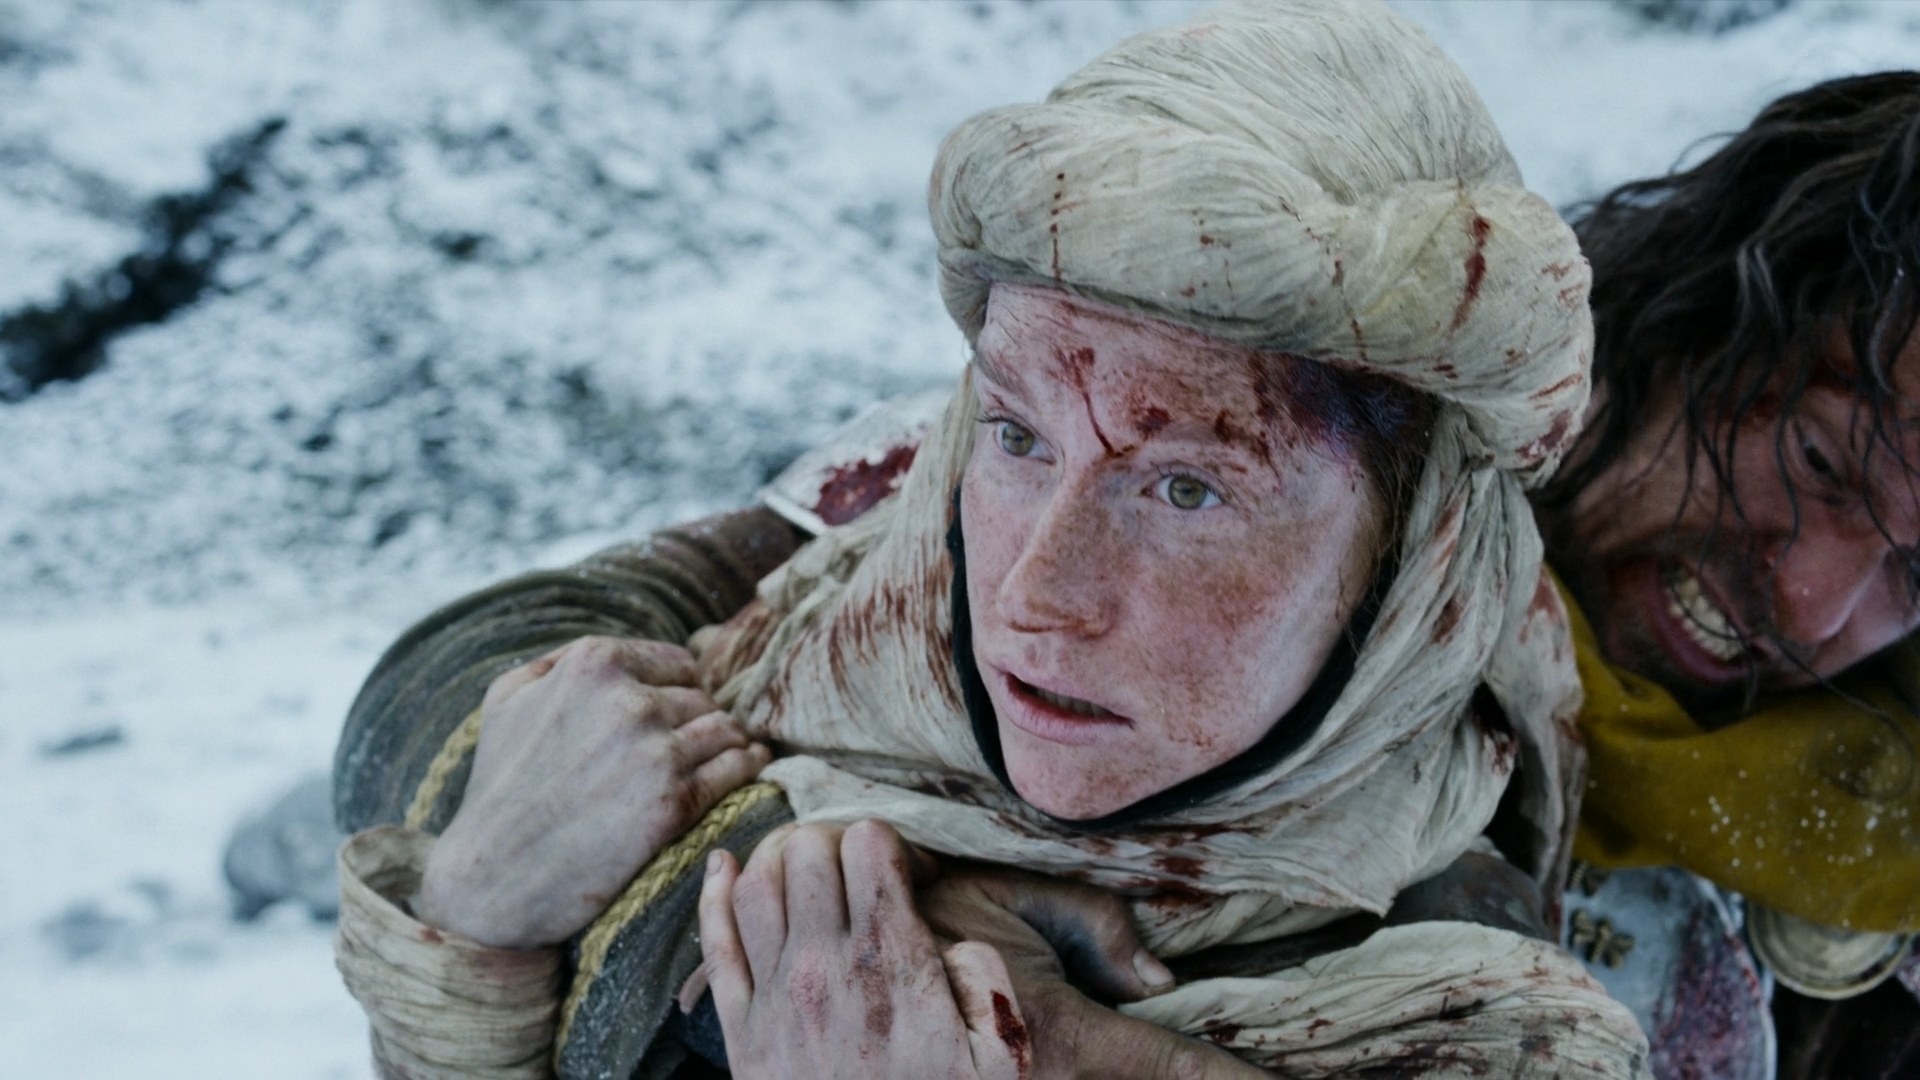 A close-up shot of an Aiel woman (Magdalena SIttova) with a white-beige shoufa wrapped around her head. She is spattered in blood, and a man in a yellow cape is holding her from behind. Her face is a mask of shock.